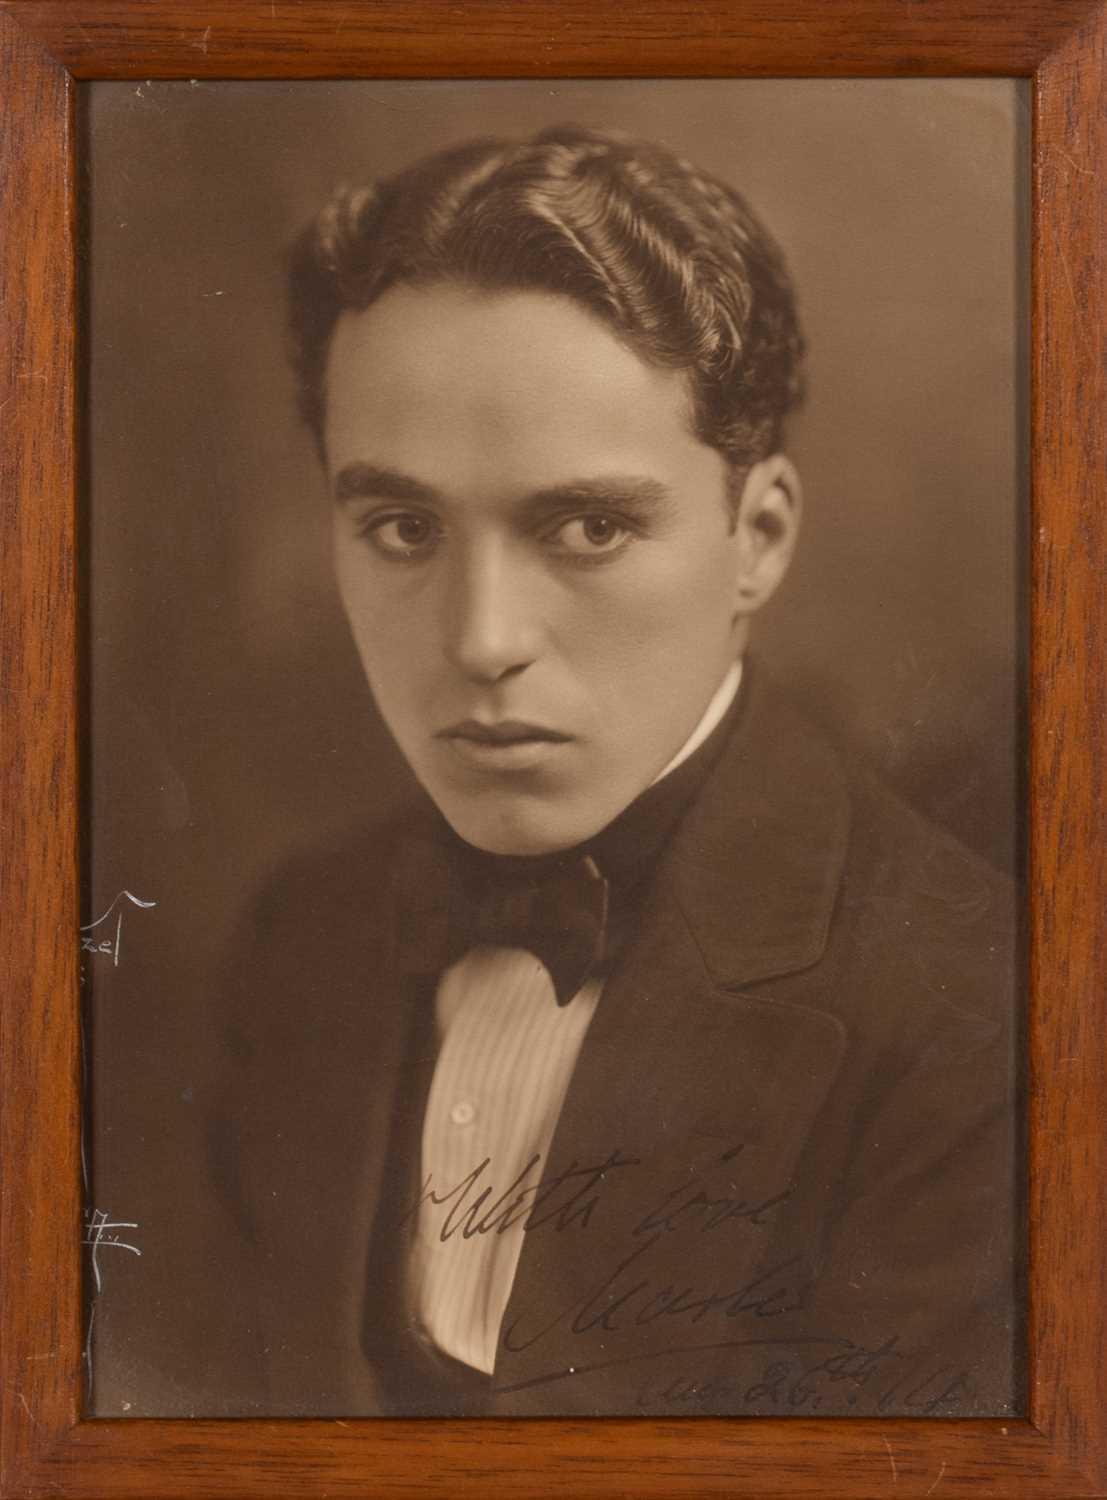 Lot 5050 - An early inscribed photograph of Charlie Chaplin